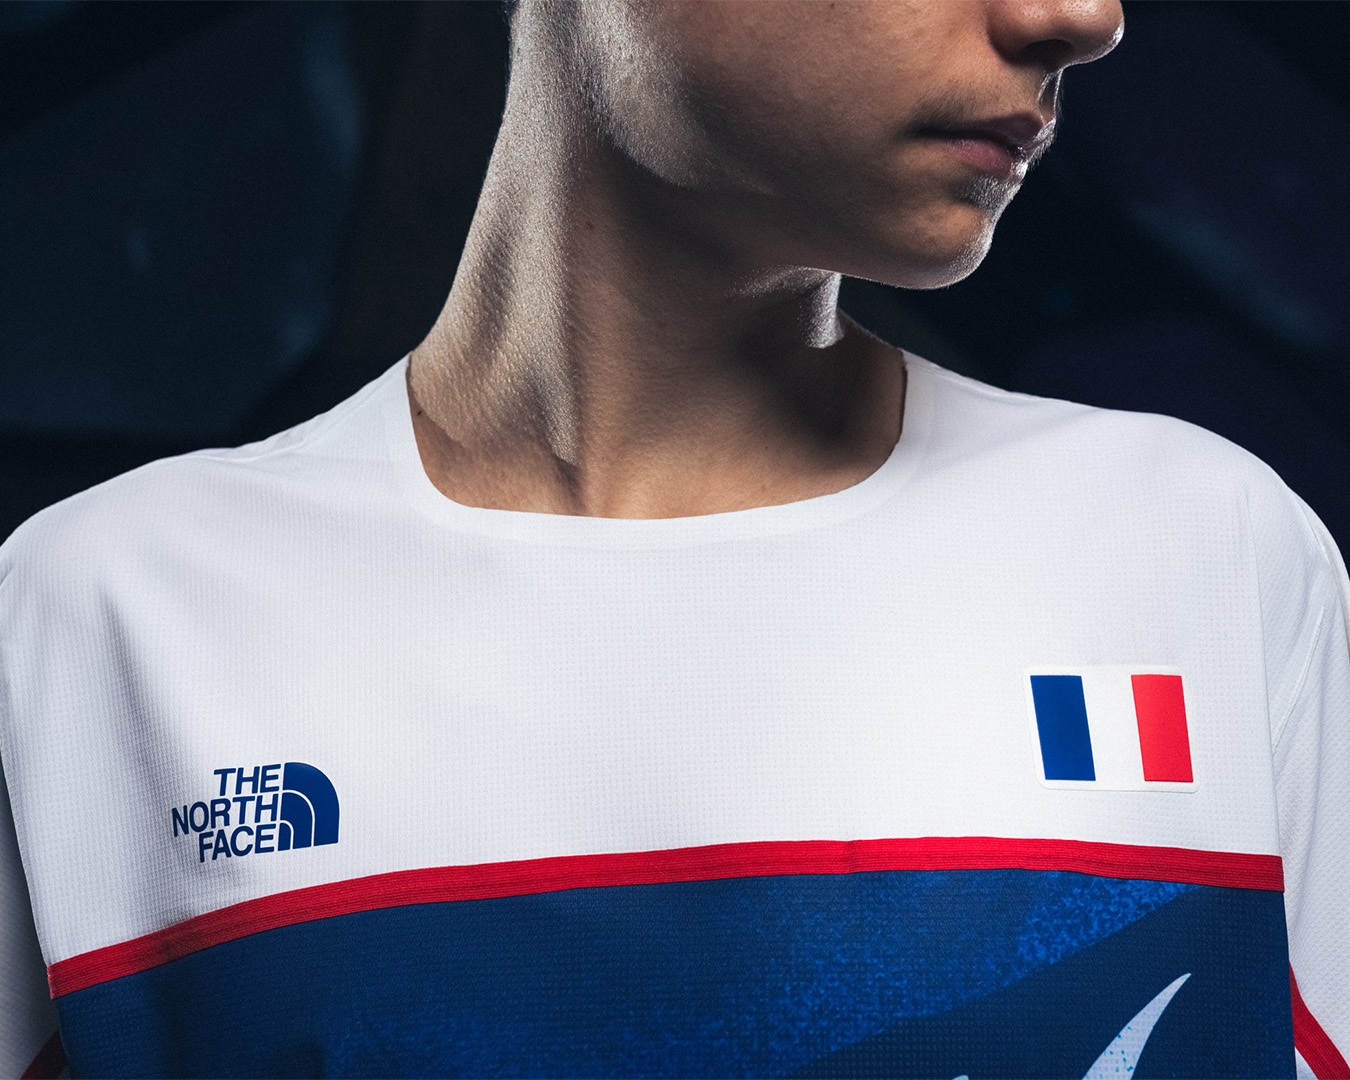 Person wearing sports jersey with The North Face logo and French flag